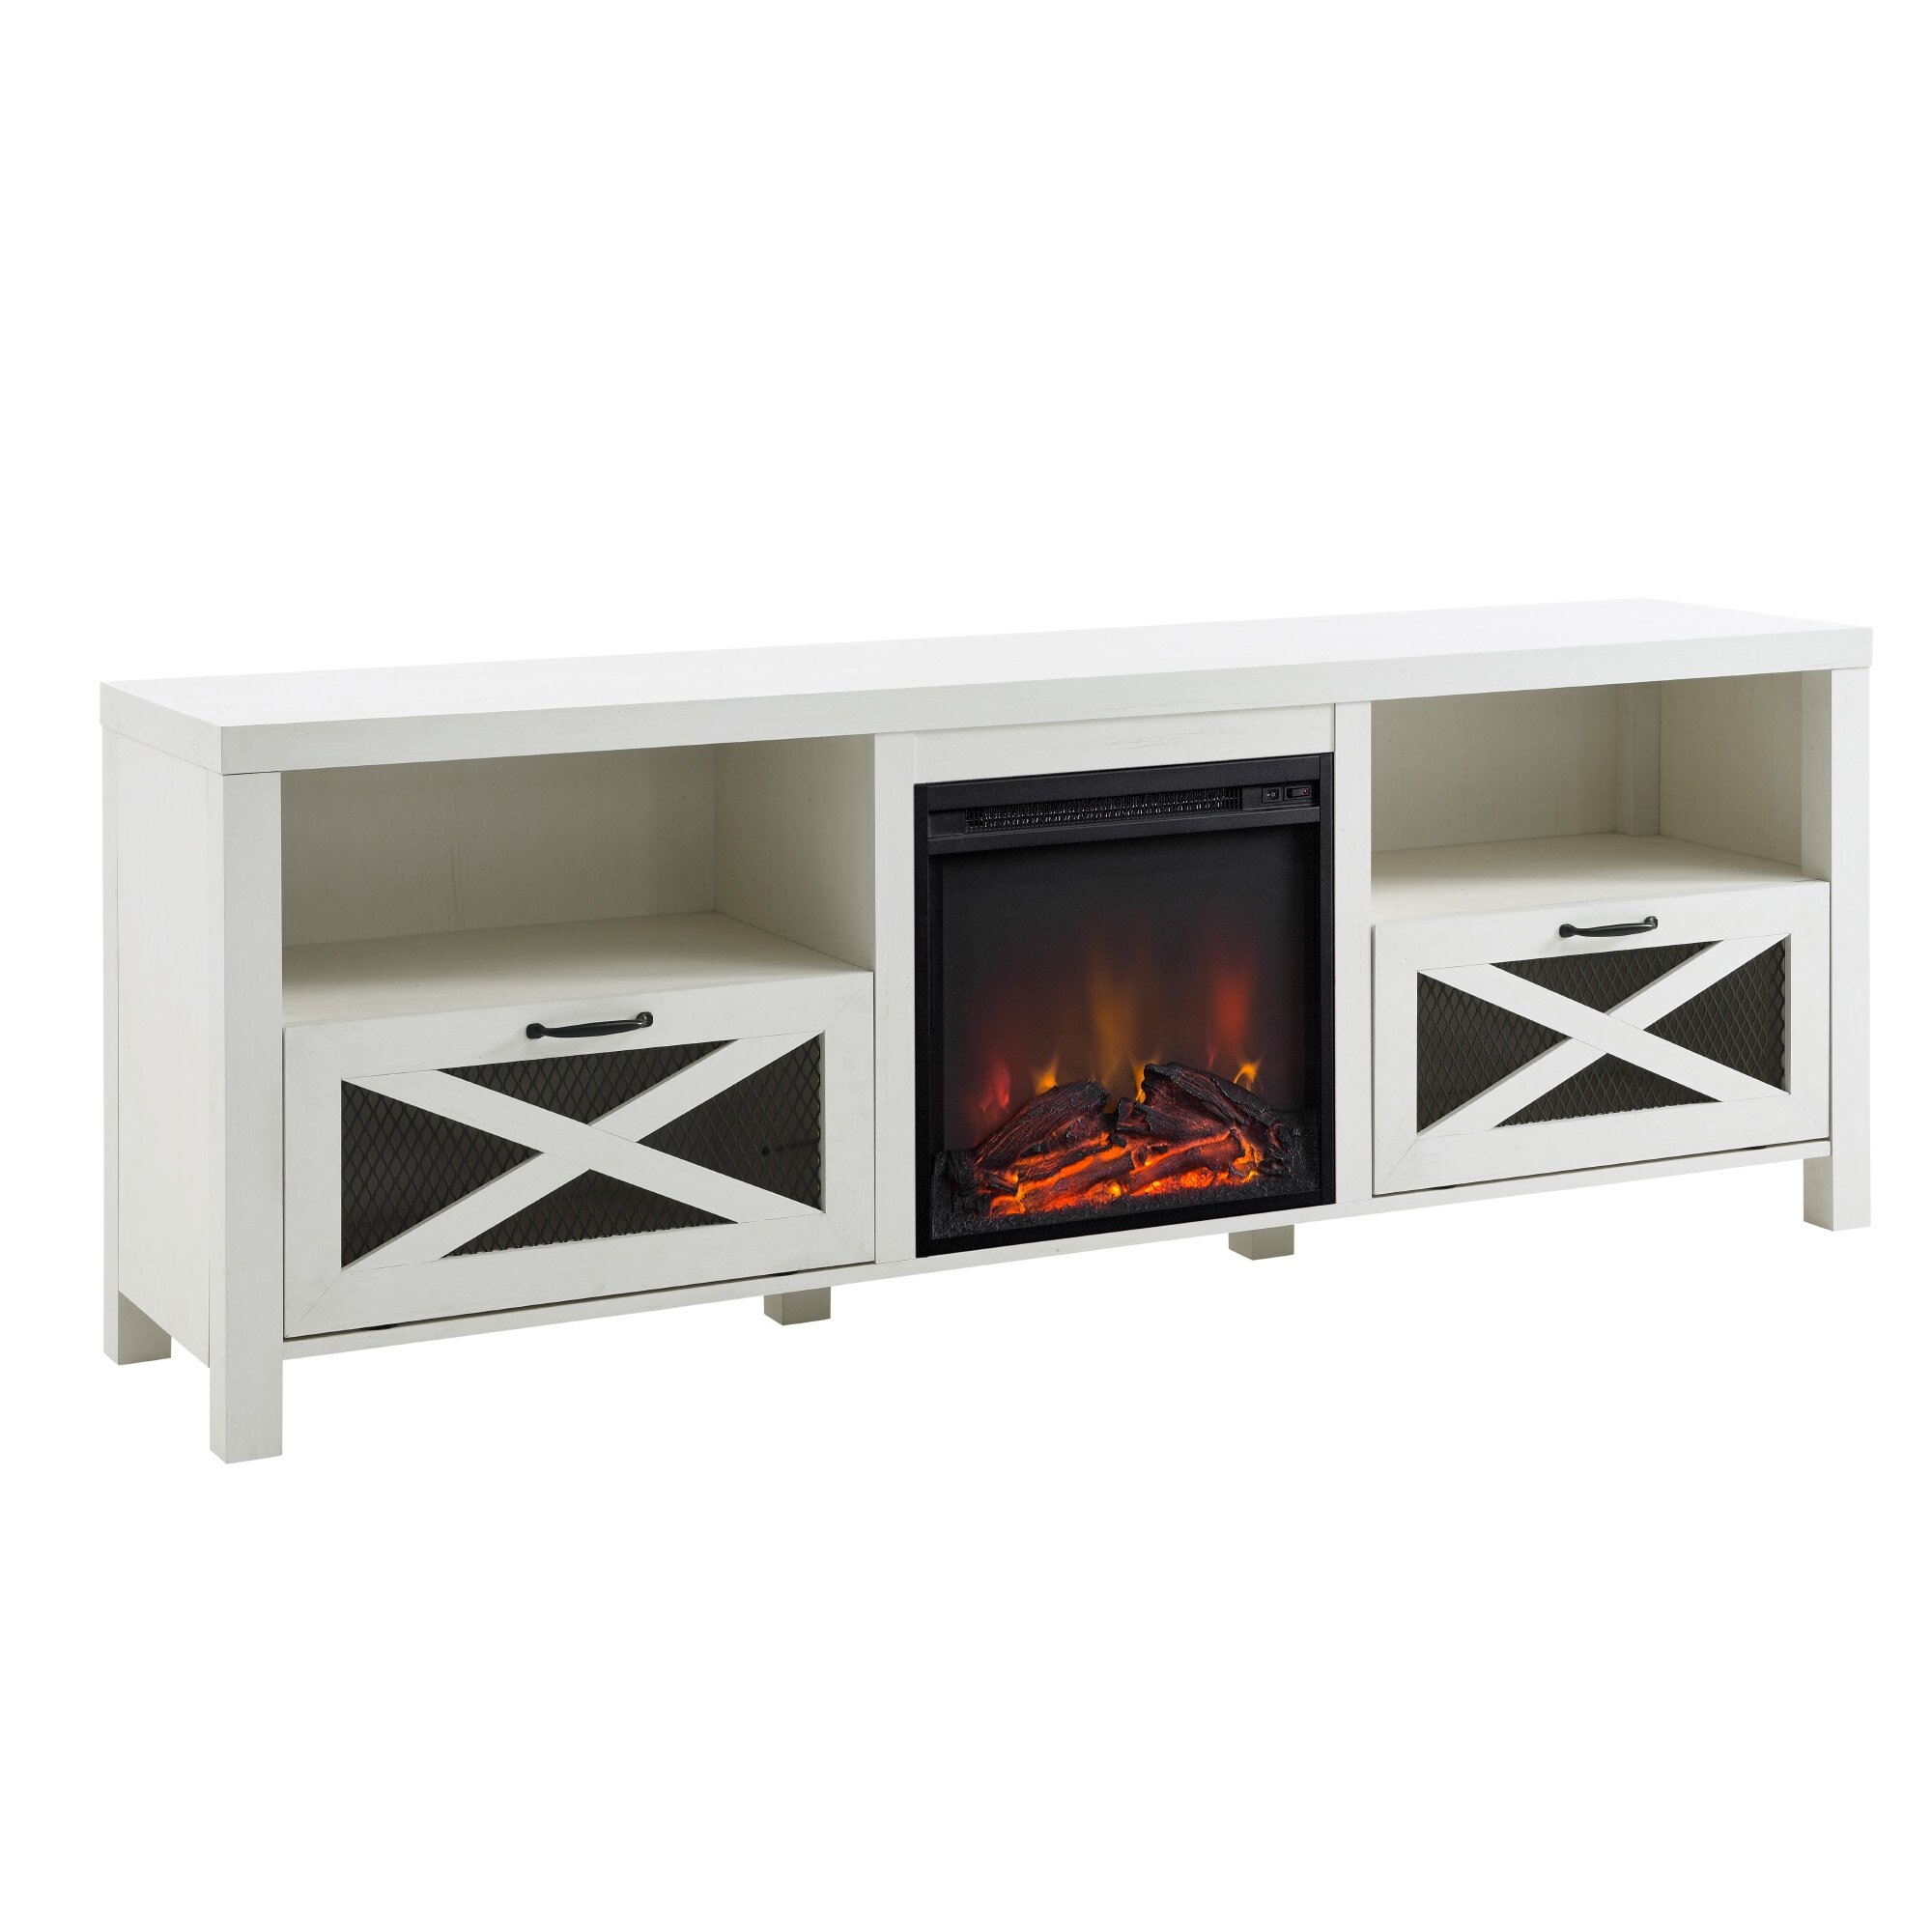 Tansey TV Stand for TVs up to 78" with Fireplace Included - Image 4